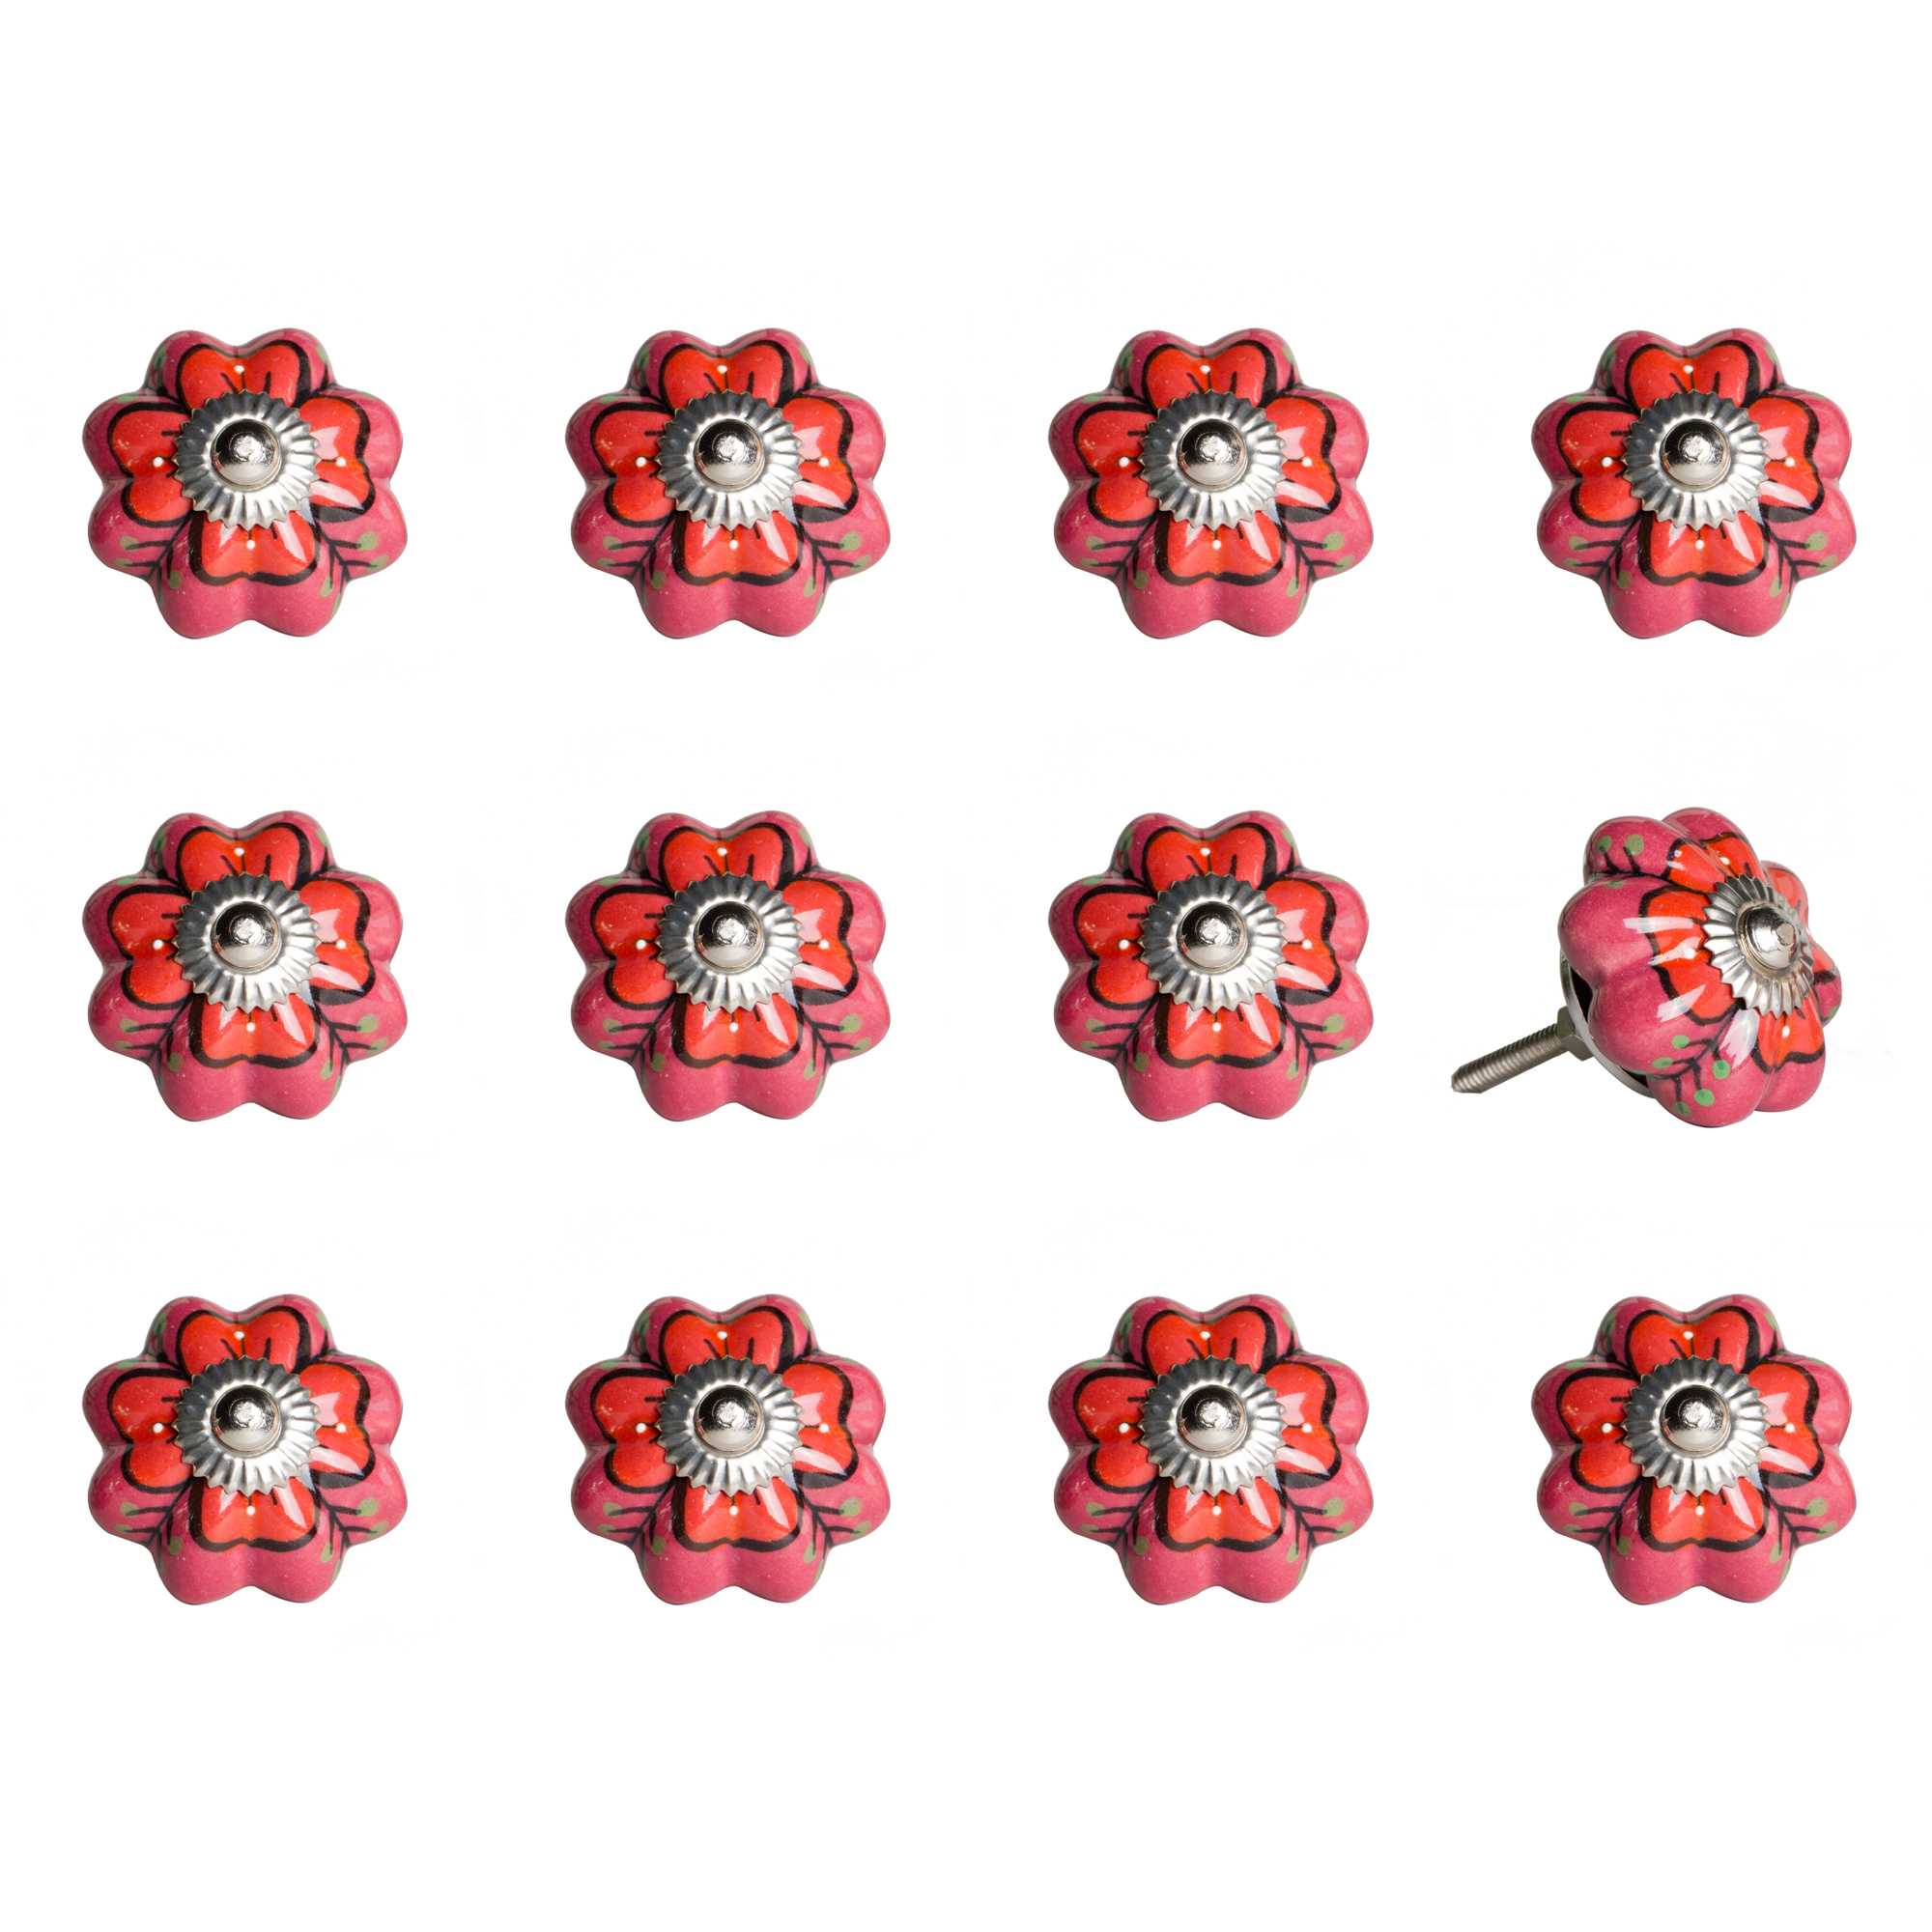 1.5" x 1.5" x 1.5" Pink, Red and Green - Knobs 12-Pack